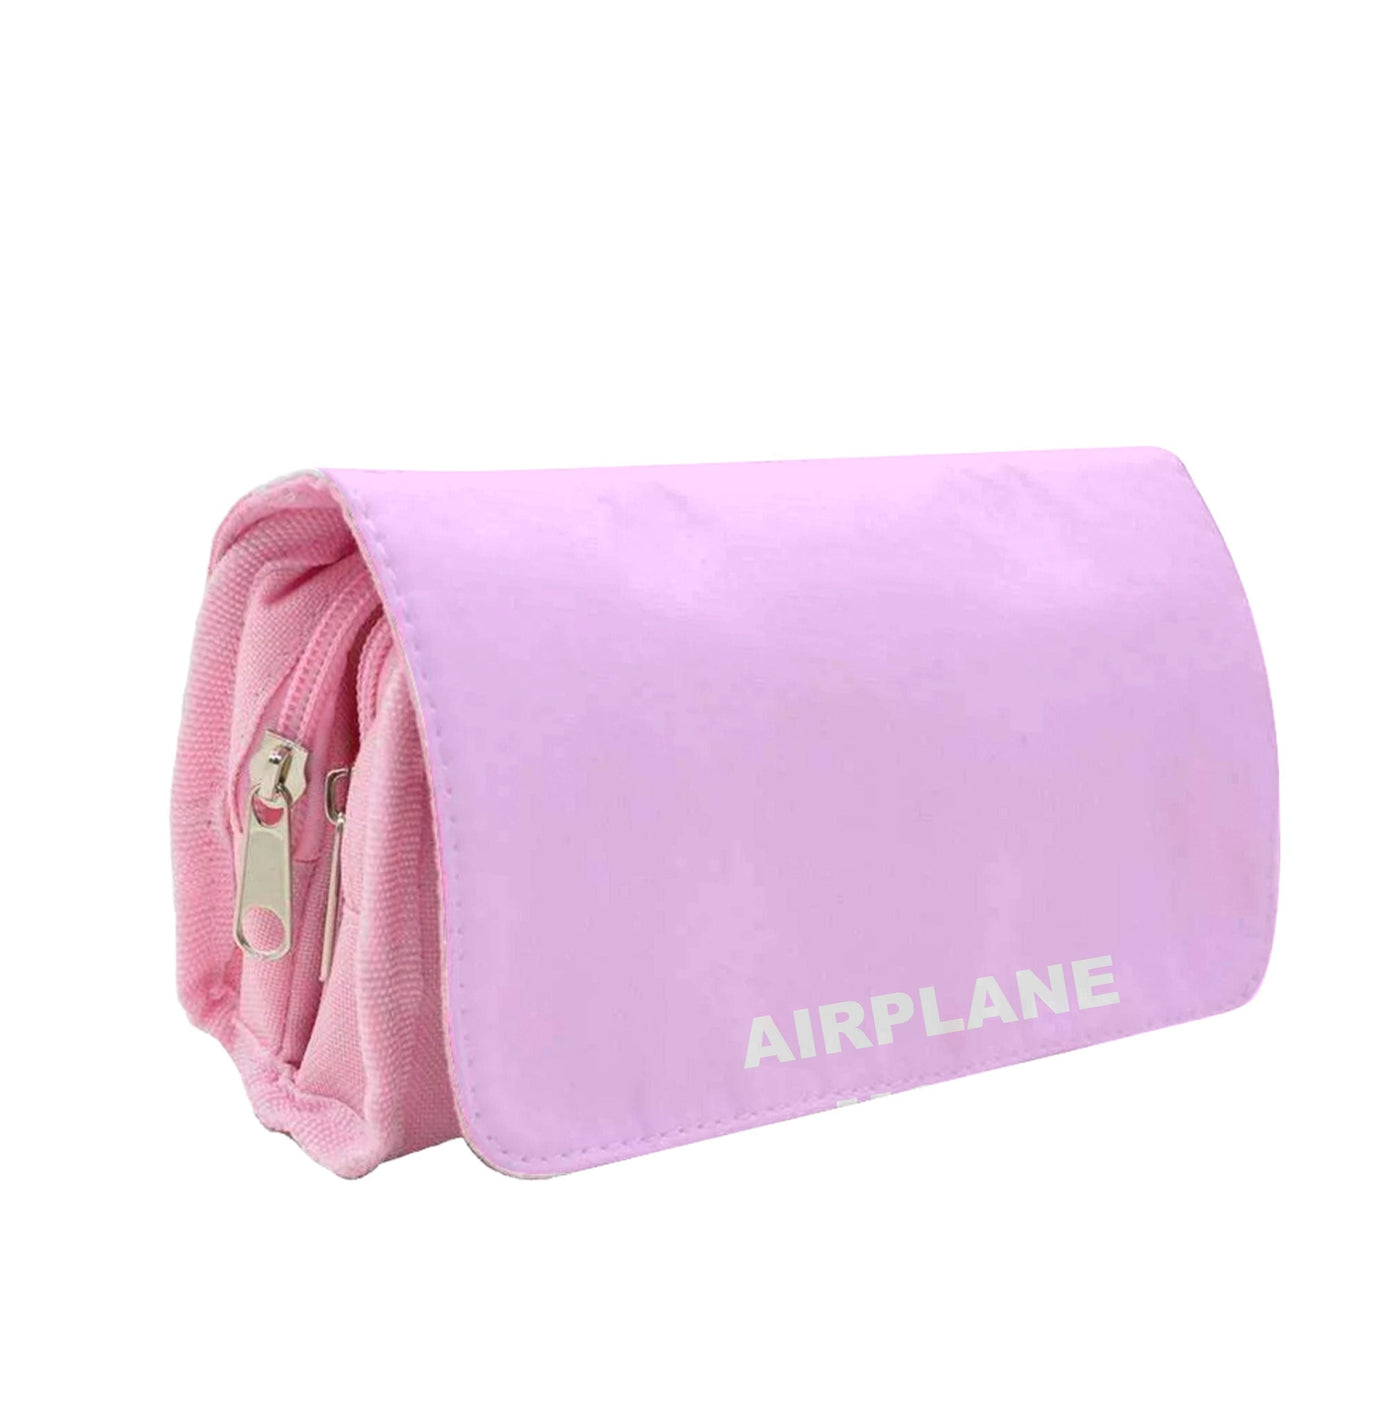 Airplane Mode On - Travel Pencil Case